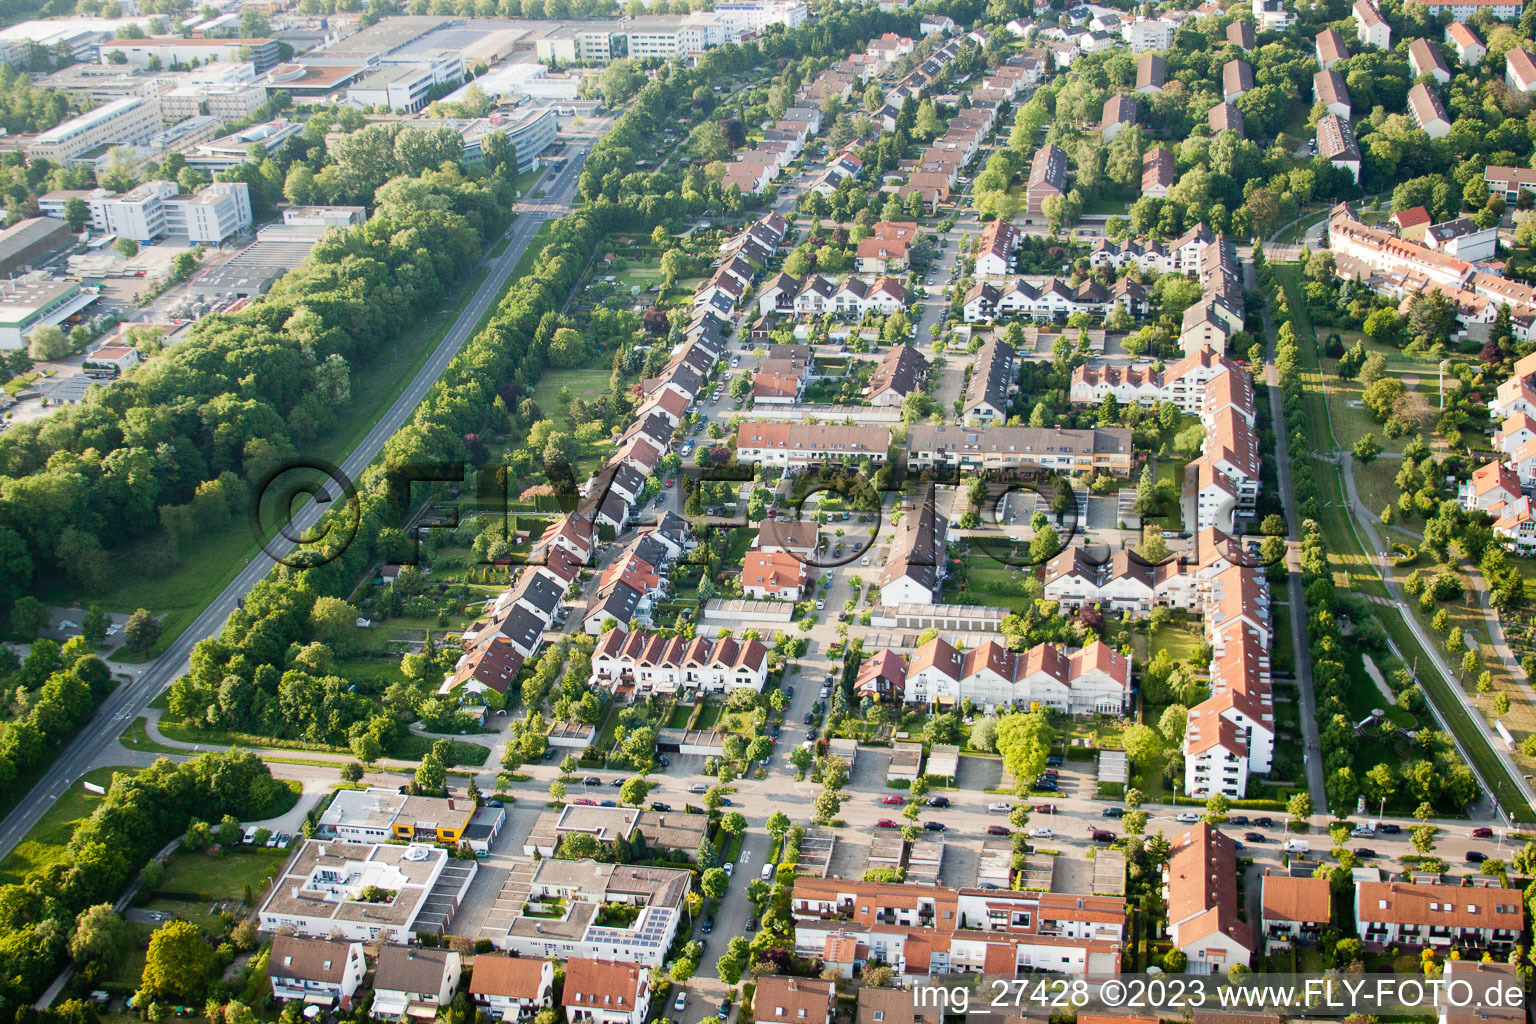 Bird's eye view of Ouch in the district Durlach in Karlsruhe in the state Baden-Wuerttemberg, Germany